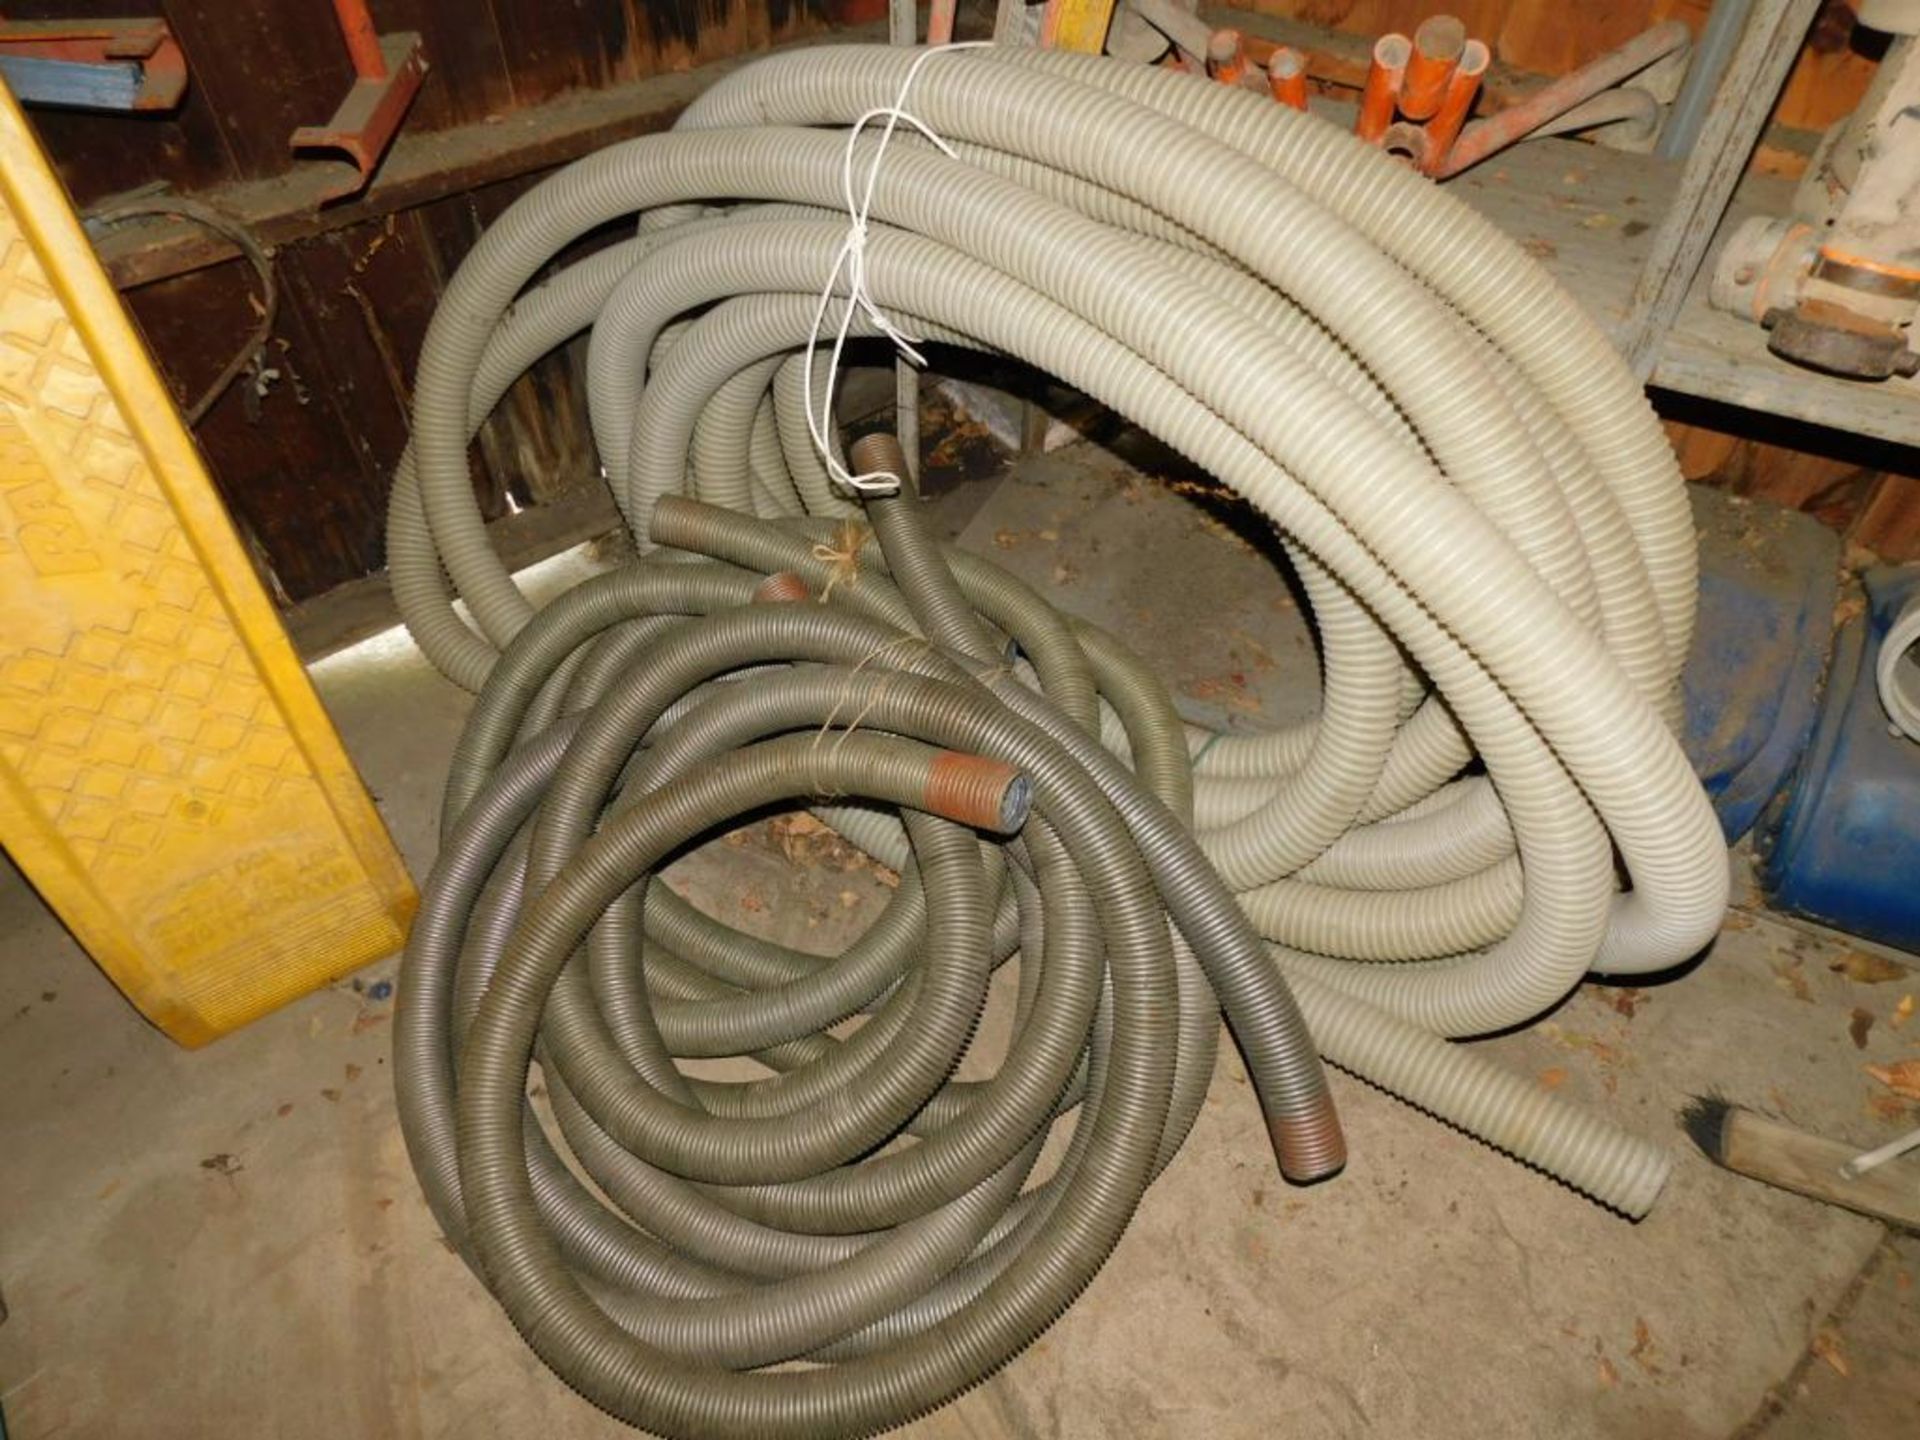 Intec Force/1 Insulation Blower w/(4) Hoses - Image 4 of 4